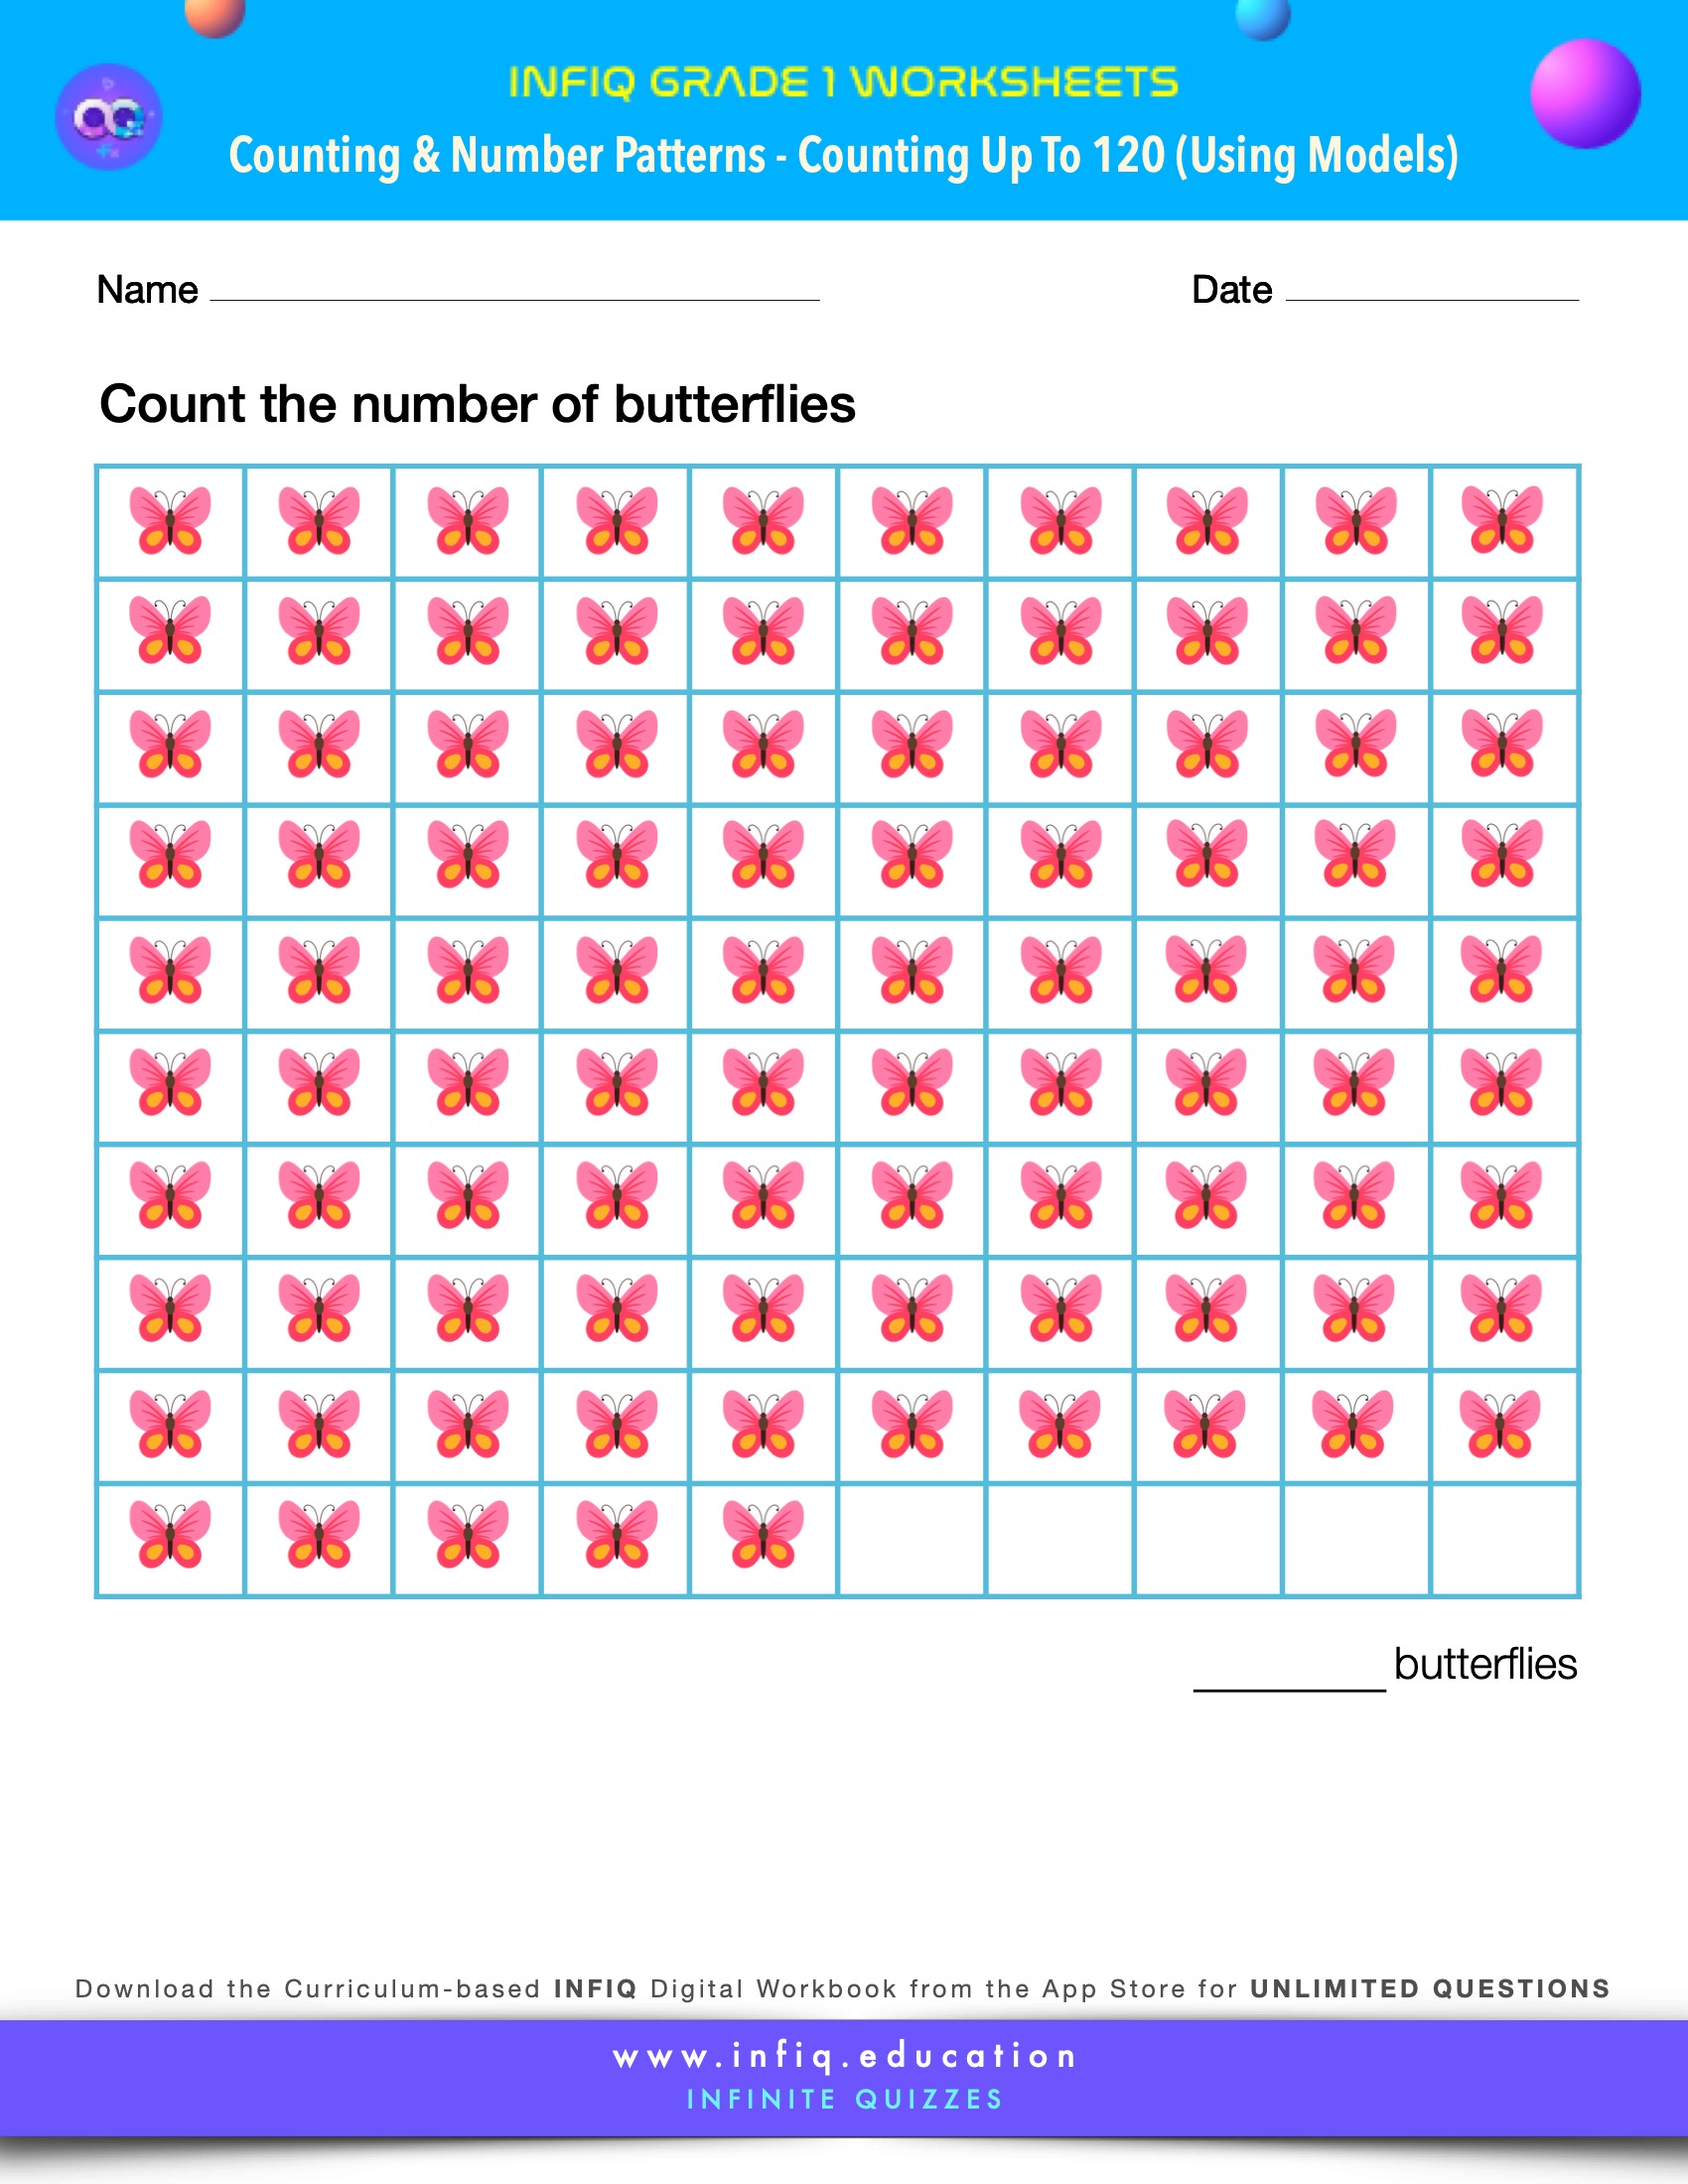 Grade 1 Math Worksheets - Counting & Number Patterns - Counting up to 120 (using models)